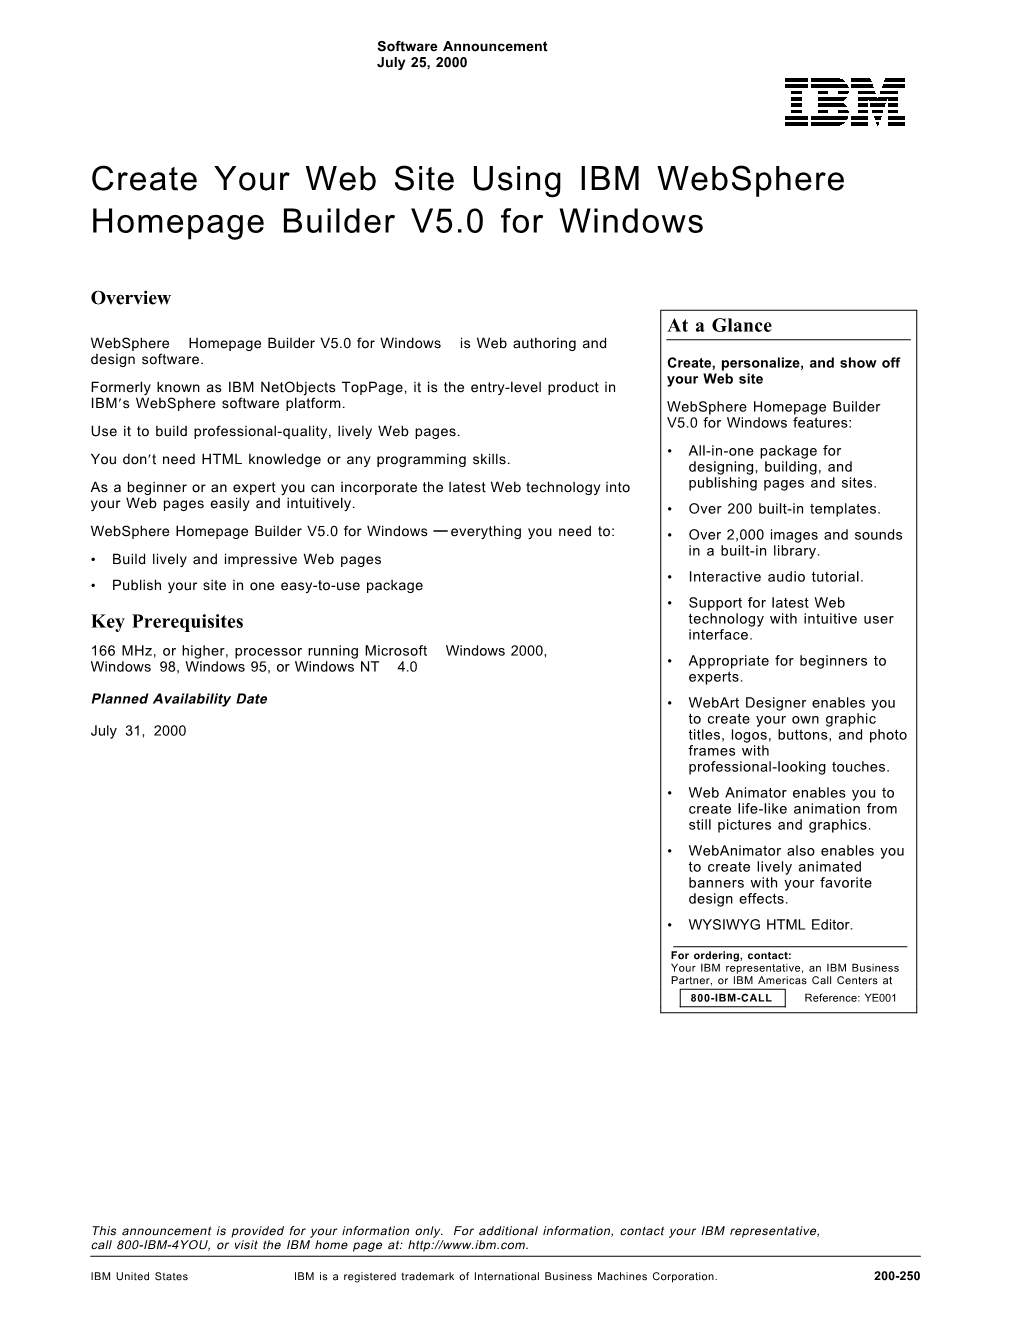 Create Your Web Site Using IBM Websphere Homepage Builder V5.0 for Windows